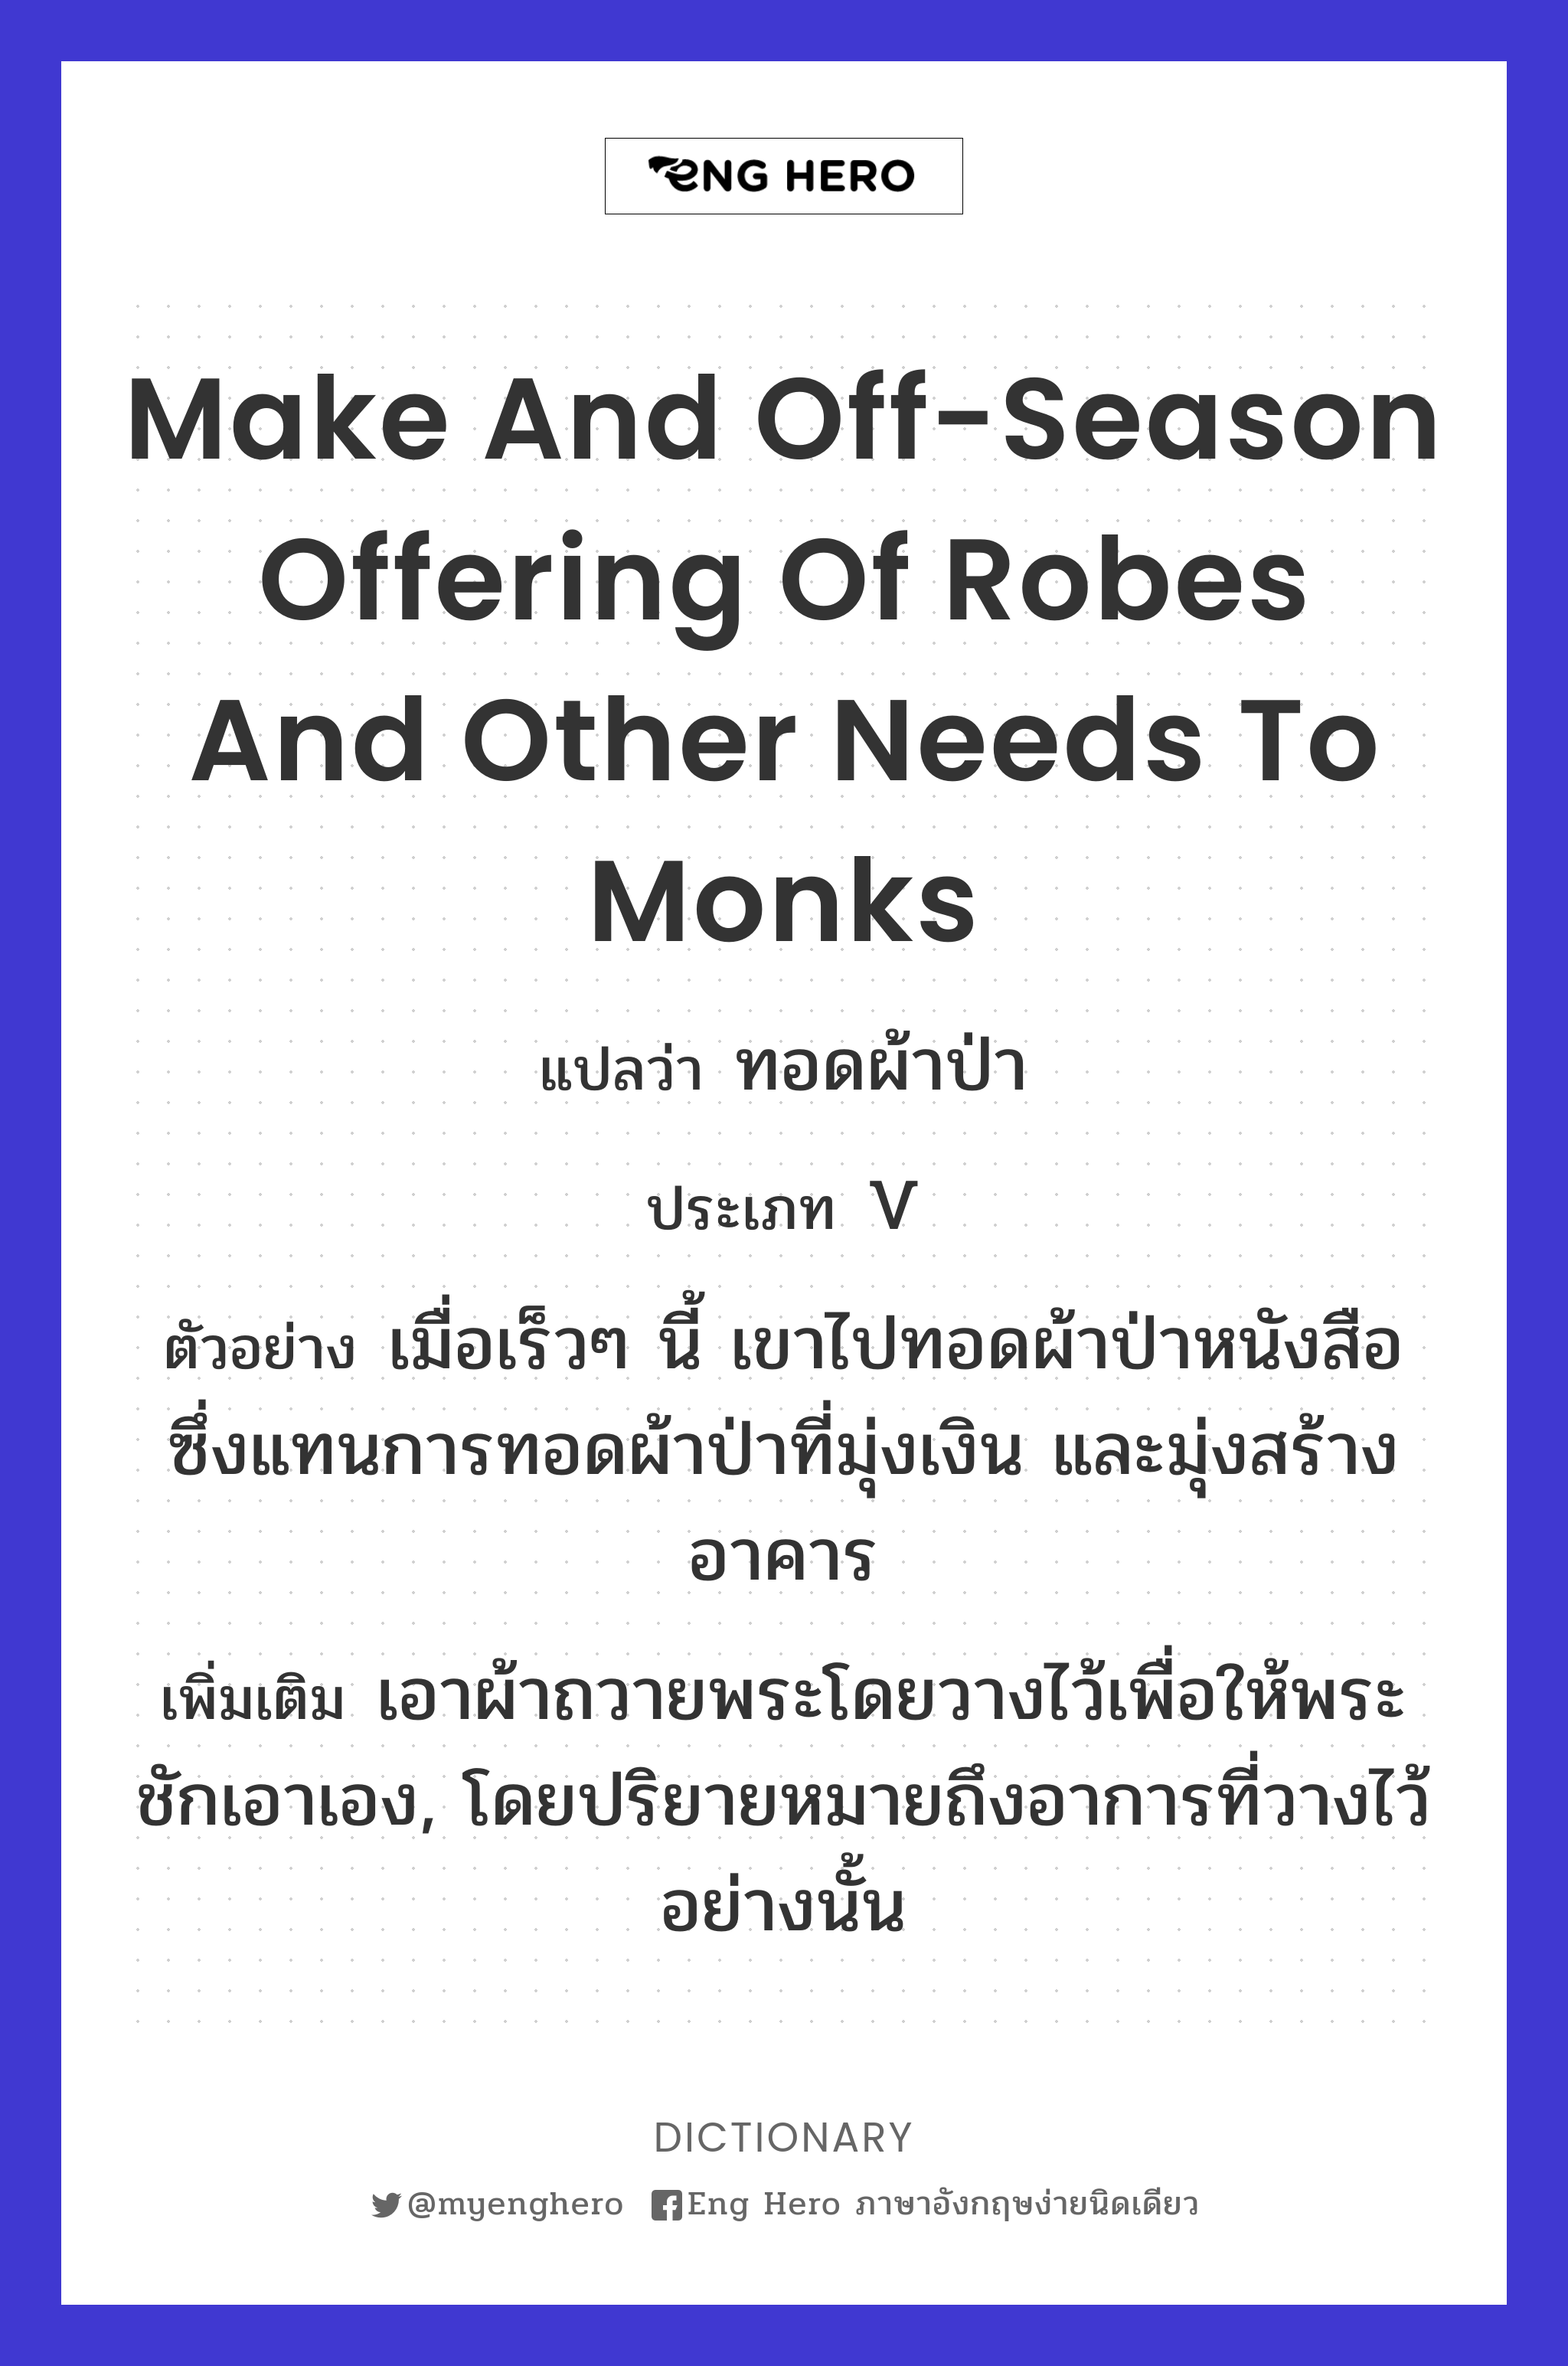 make and off-season offering of robes and other needs to monks